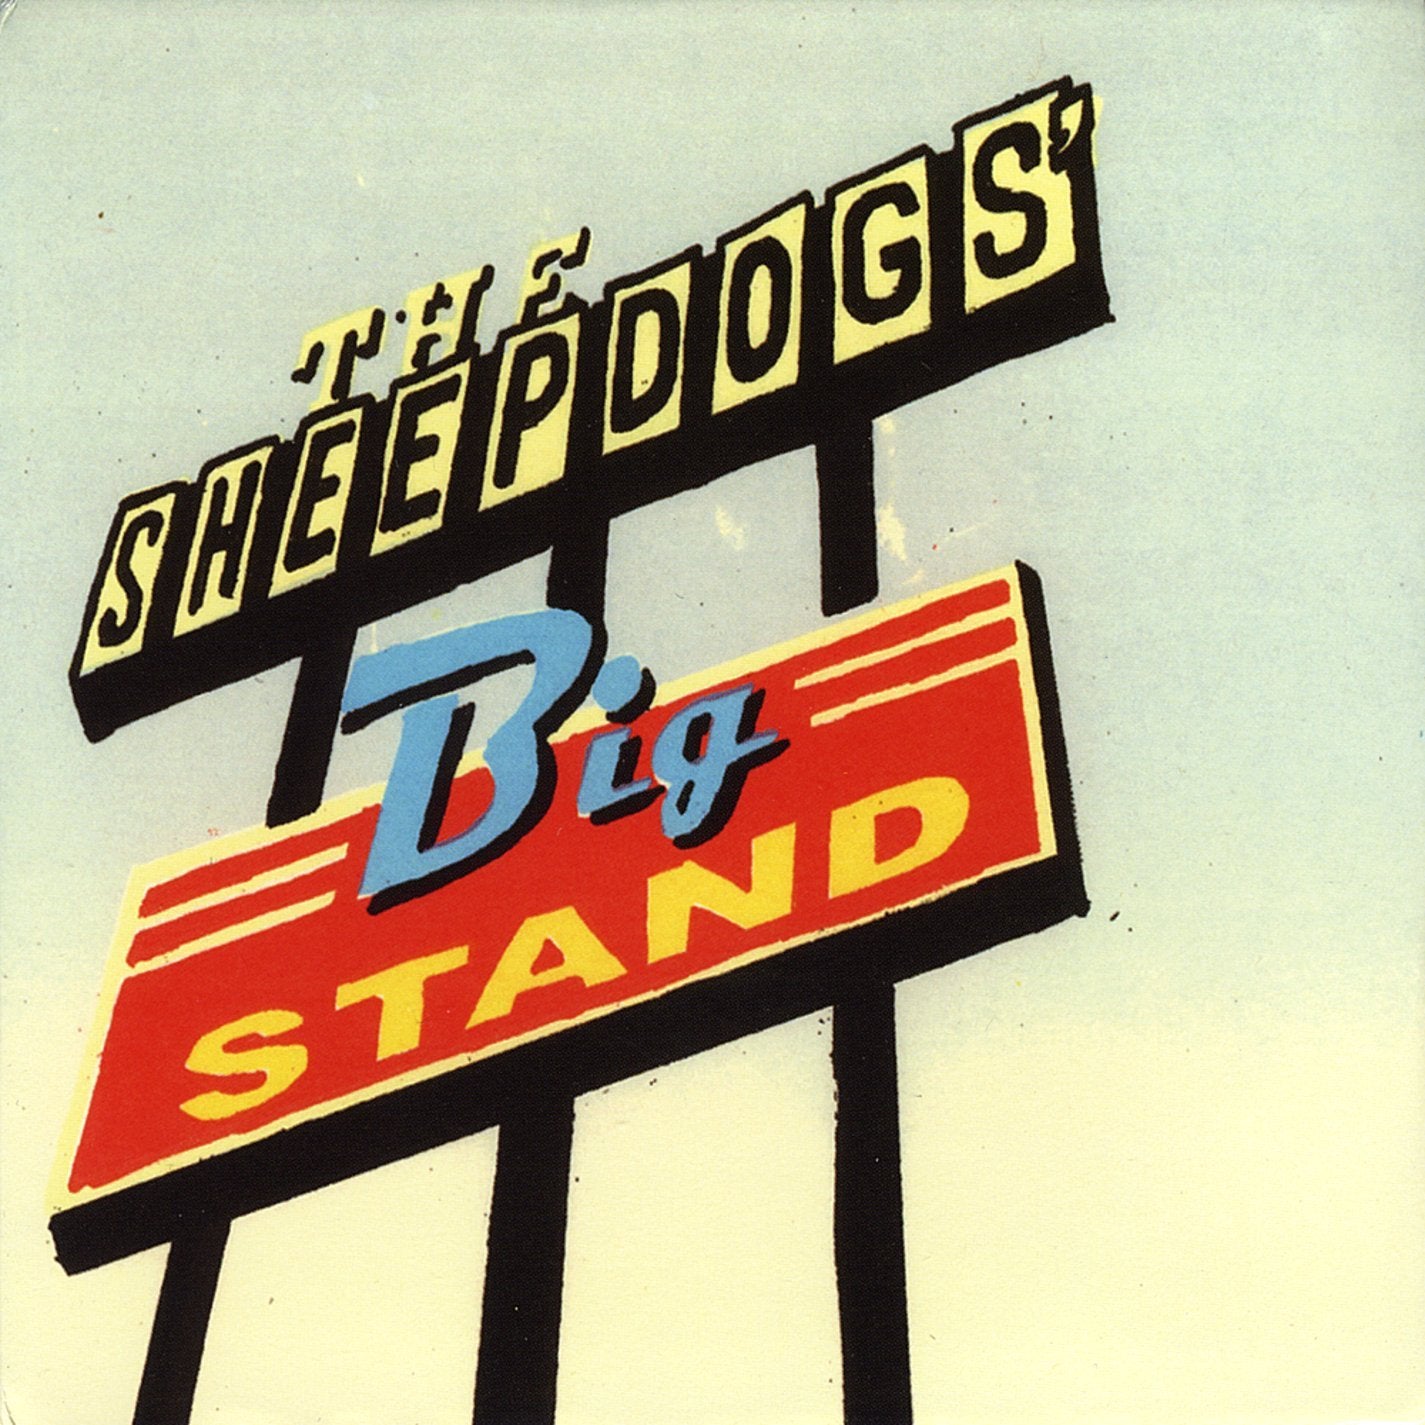 2LP - Sheepdogs - Big Stand